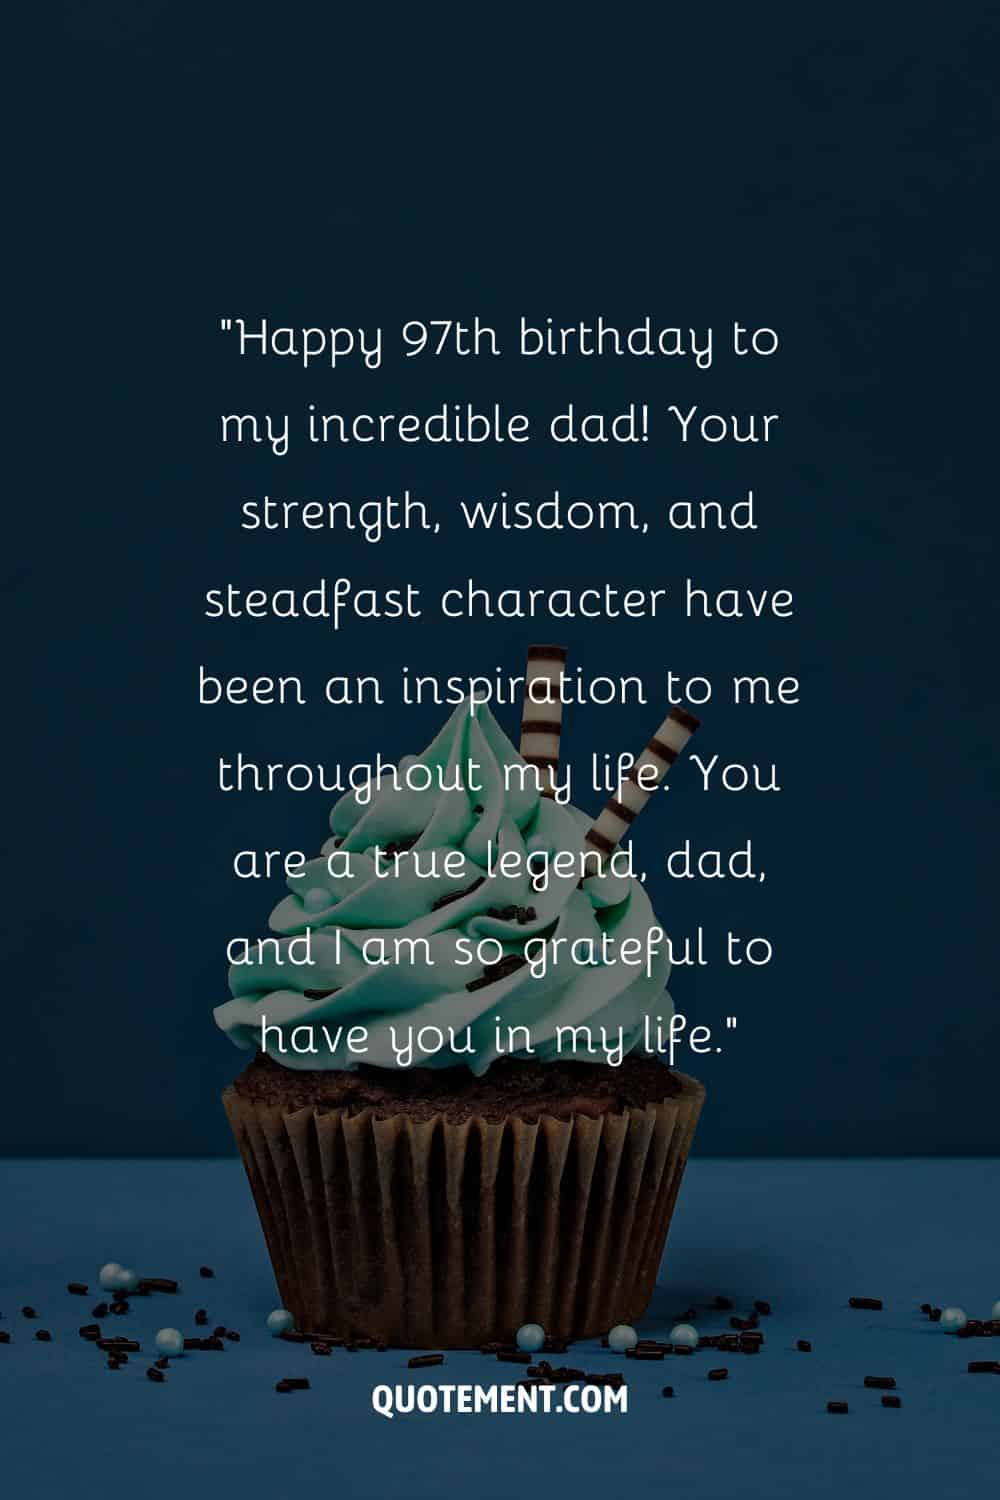 Heart touching message for a dad's 97th birthday and a cupcake in the background, too
